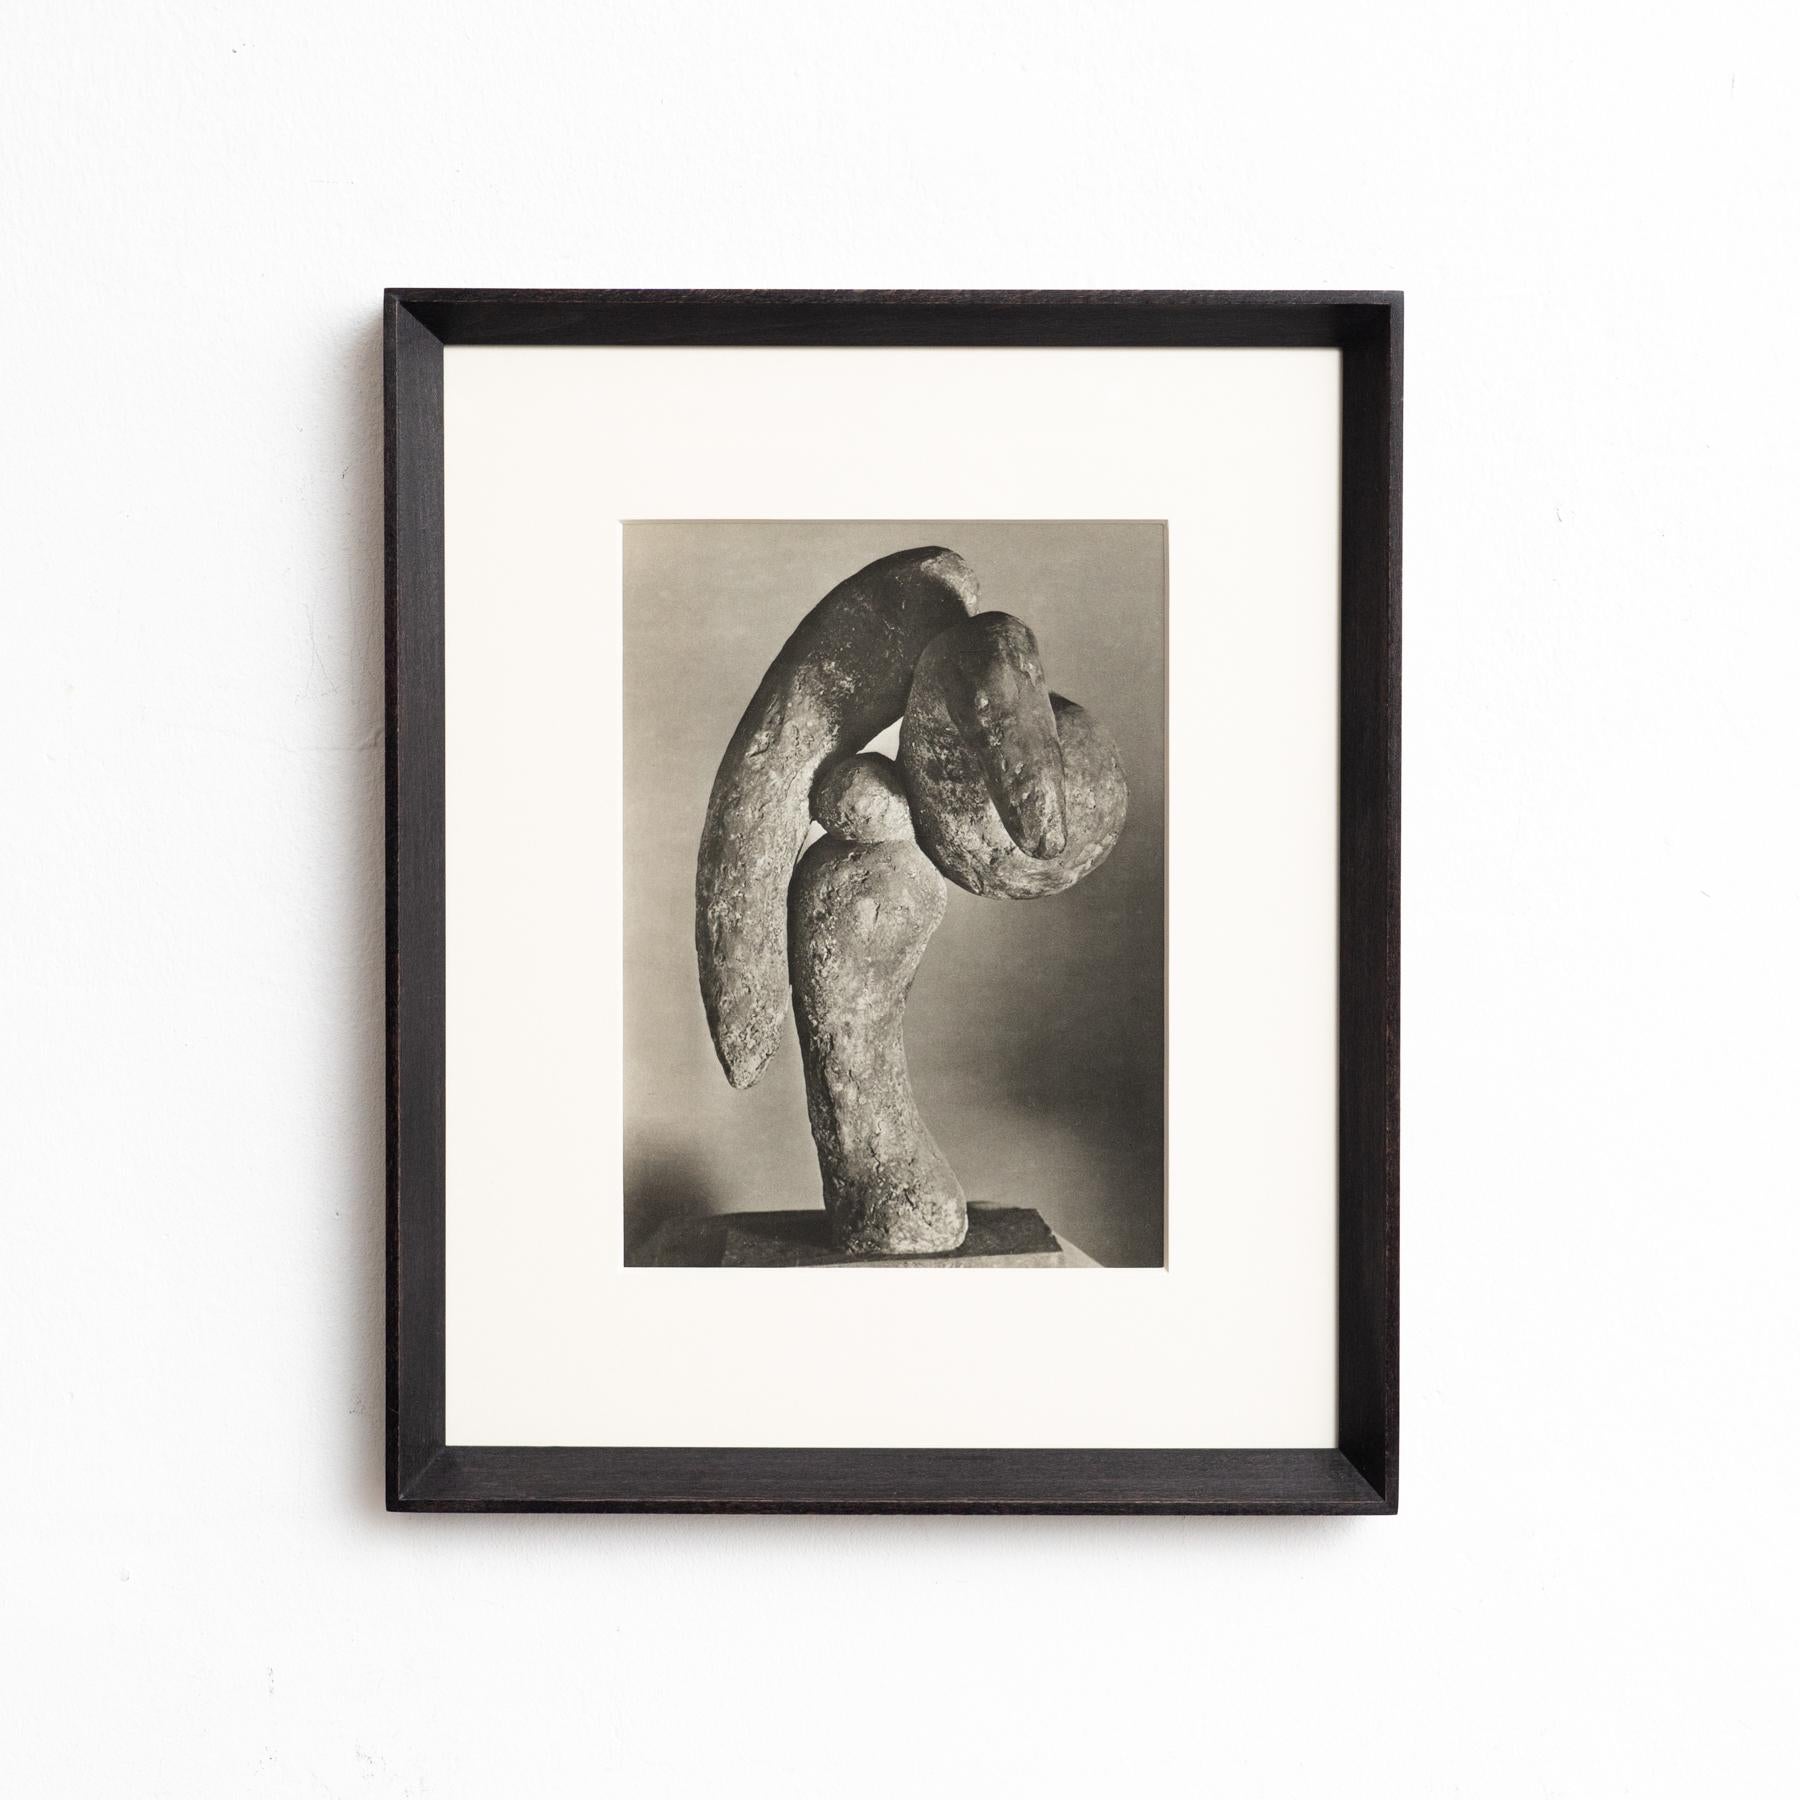 Brassai's Insight: Photogravure of Picasso's Sculpture, circa 1948

From 1948
Photography by Brassai
Photogravure
From 'The Sculptures of Picasso' by Daniel Henry Kahnweiler
Printed by Editions du Chene, France
Framed in black lacquered